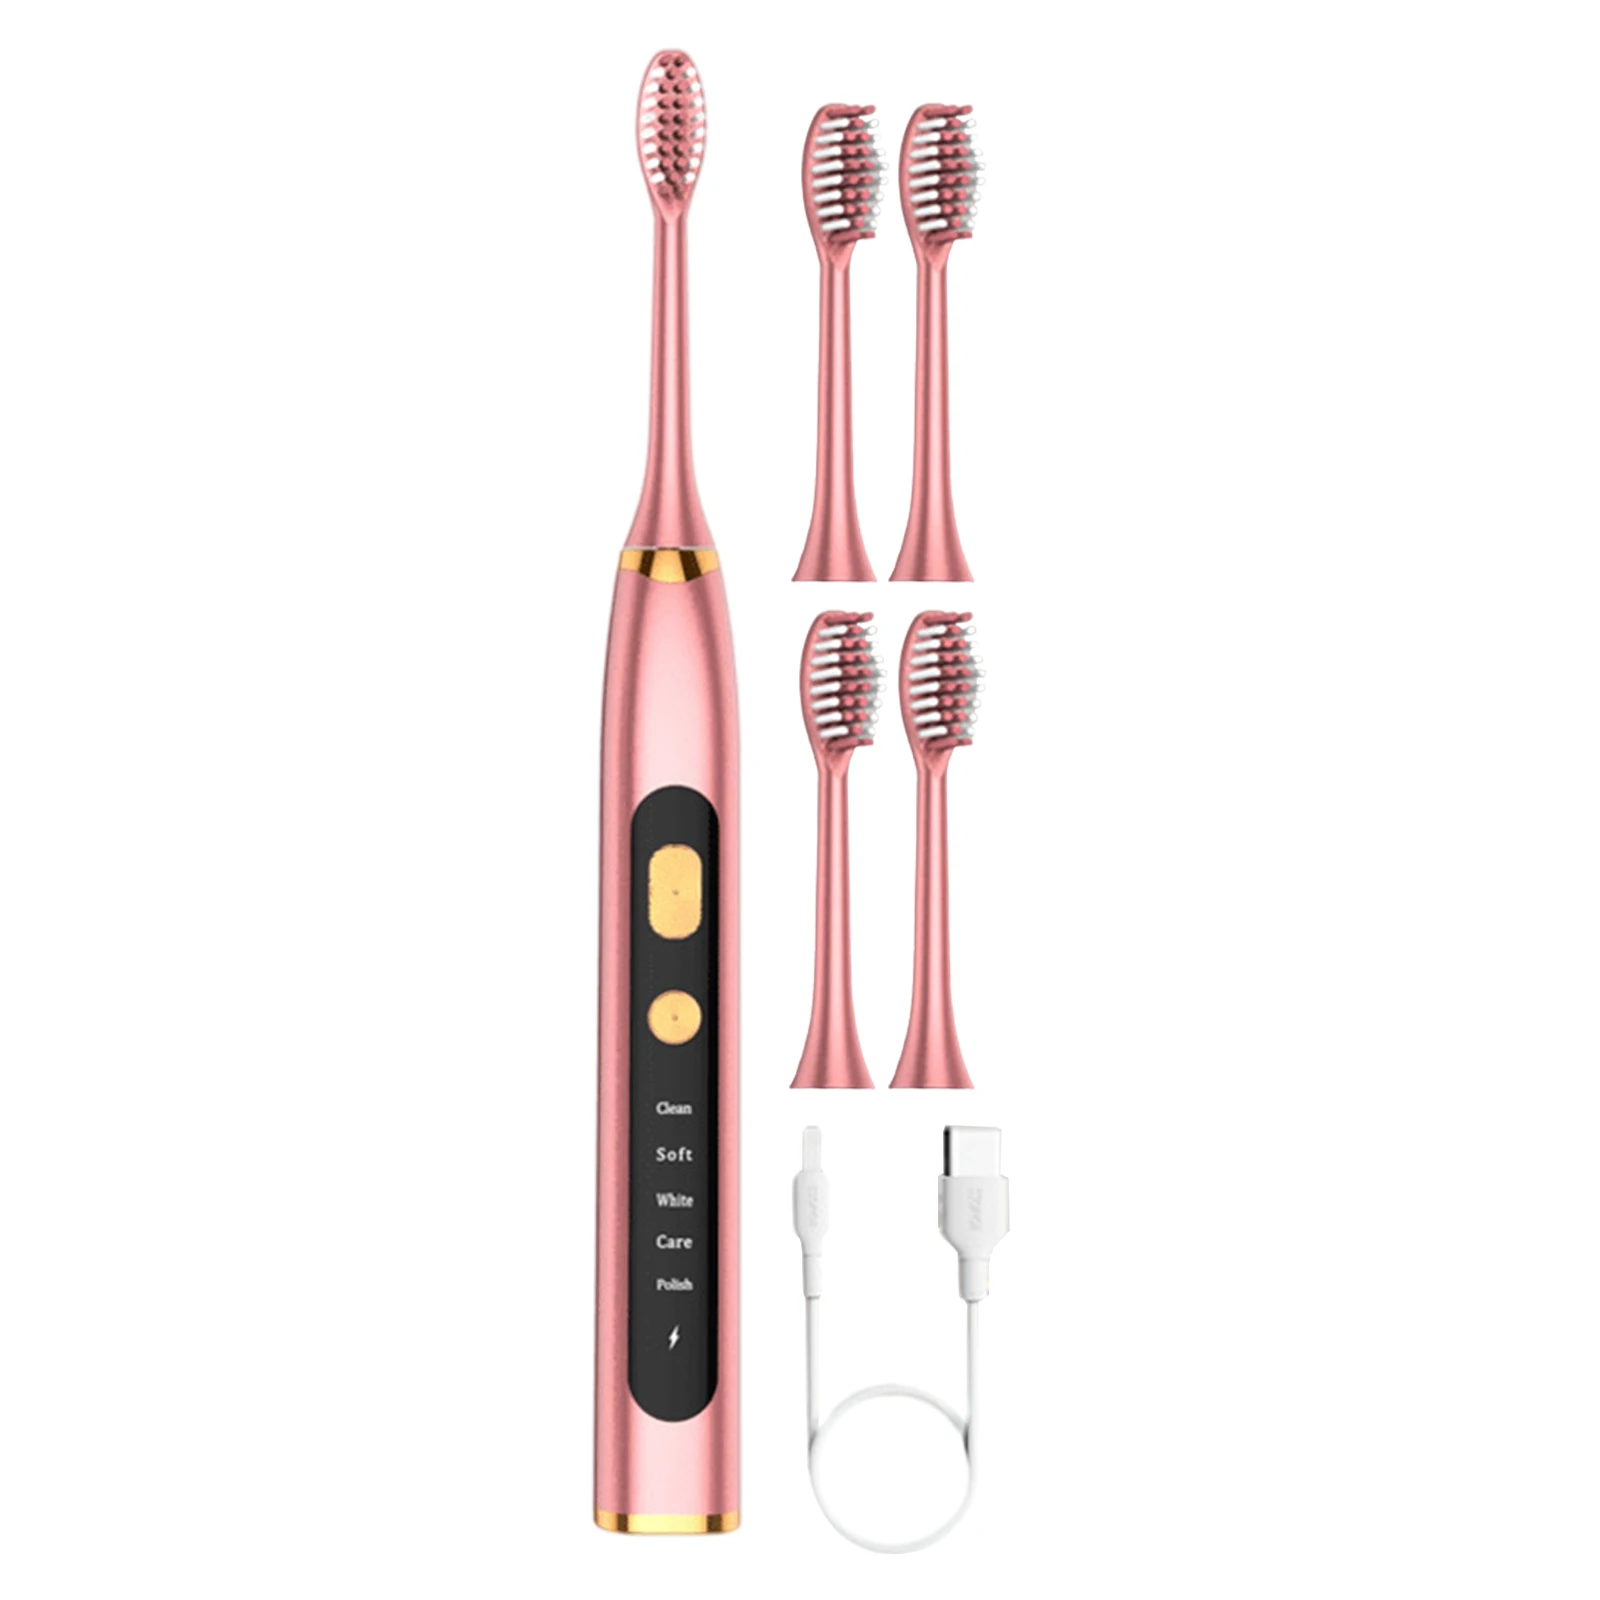 Ultra Whitening Toothbrush with Travel Case with Pressure Sensor for Kids Men Women Smart timers Rechargeable 800mAh